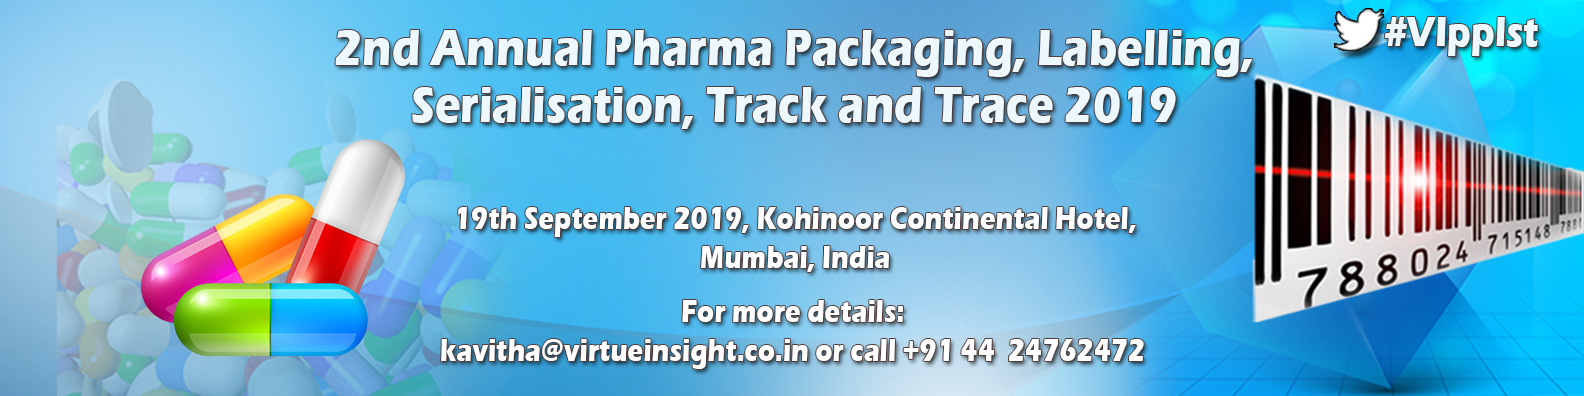 Photos of 2nd Annual Pharma Packaging, Labelling, Serialization, Track and Trace 2019